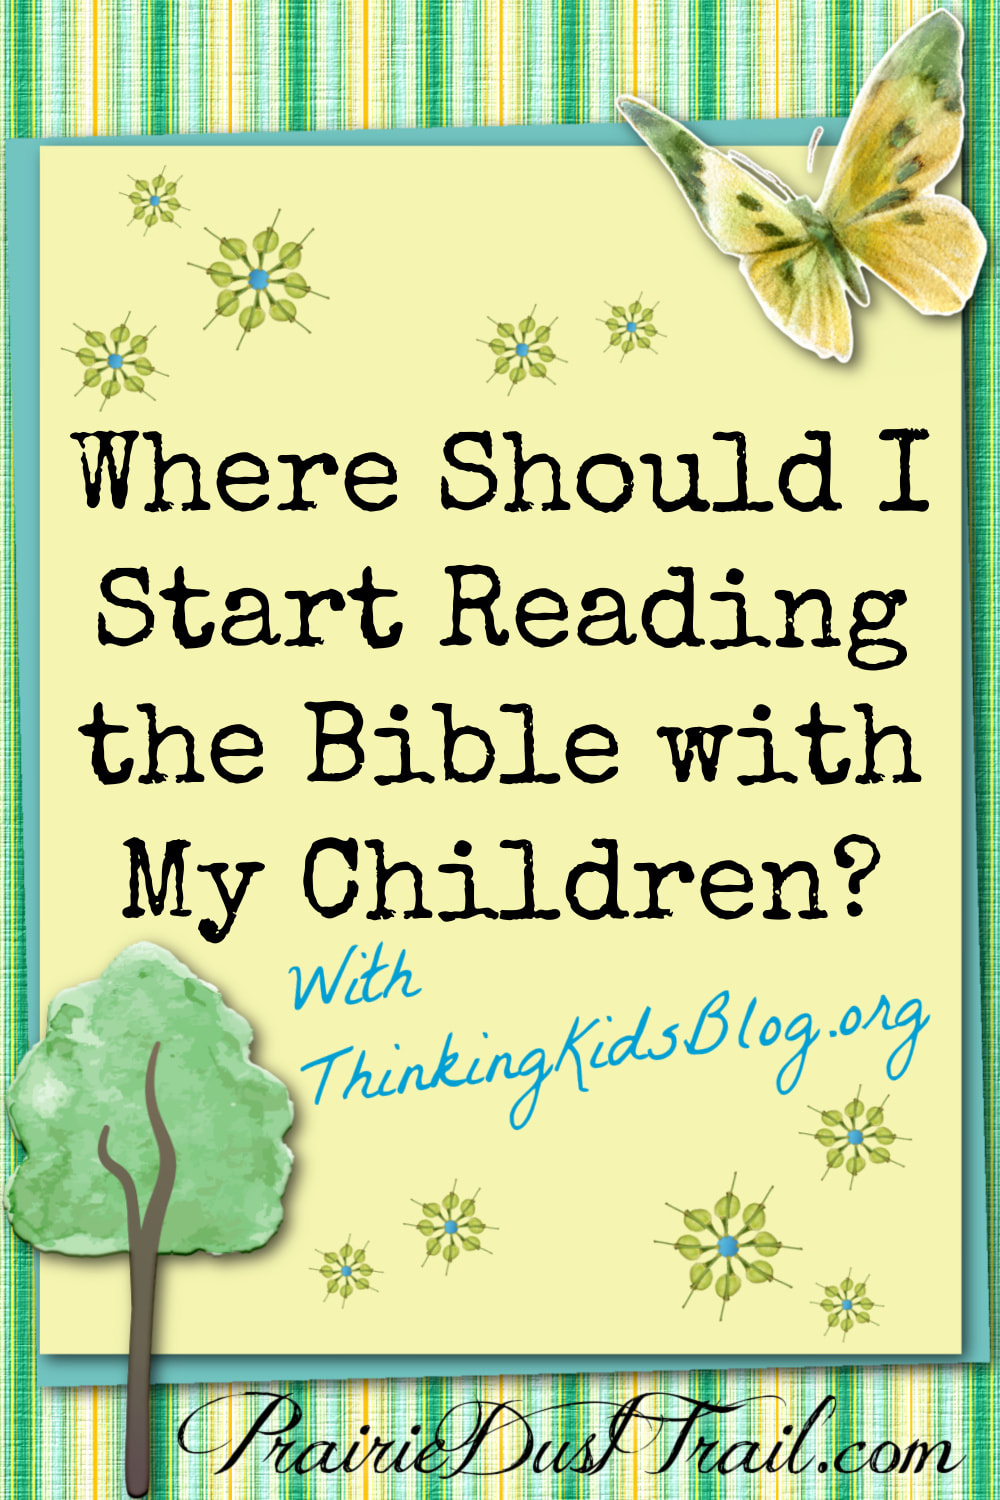 My friend Danika Cooley has created an excellent place for parents to start reading and teaching the Bible with their children. I'm so excited to share this with you!